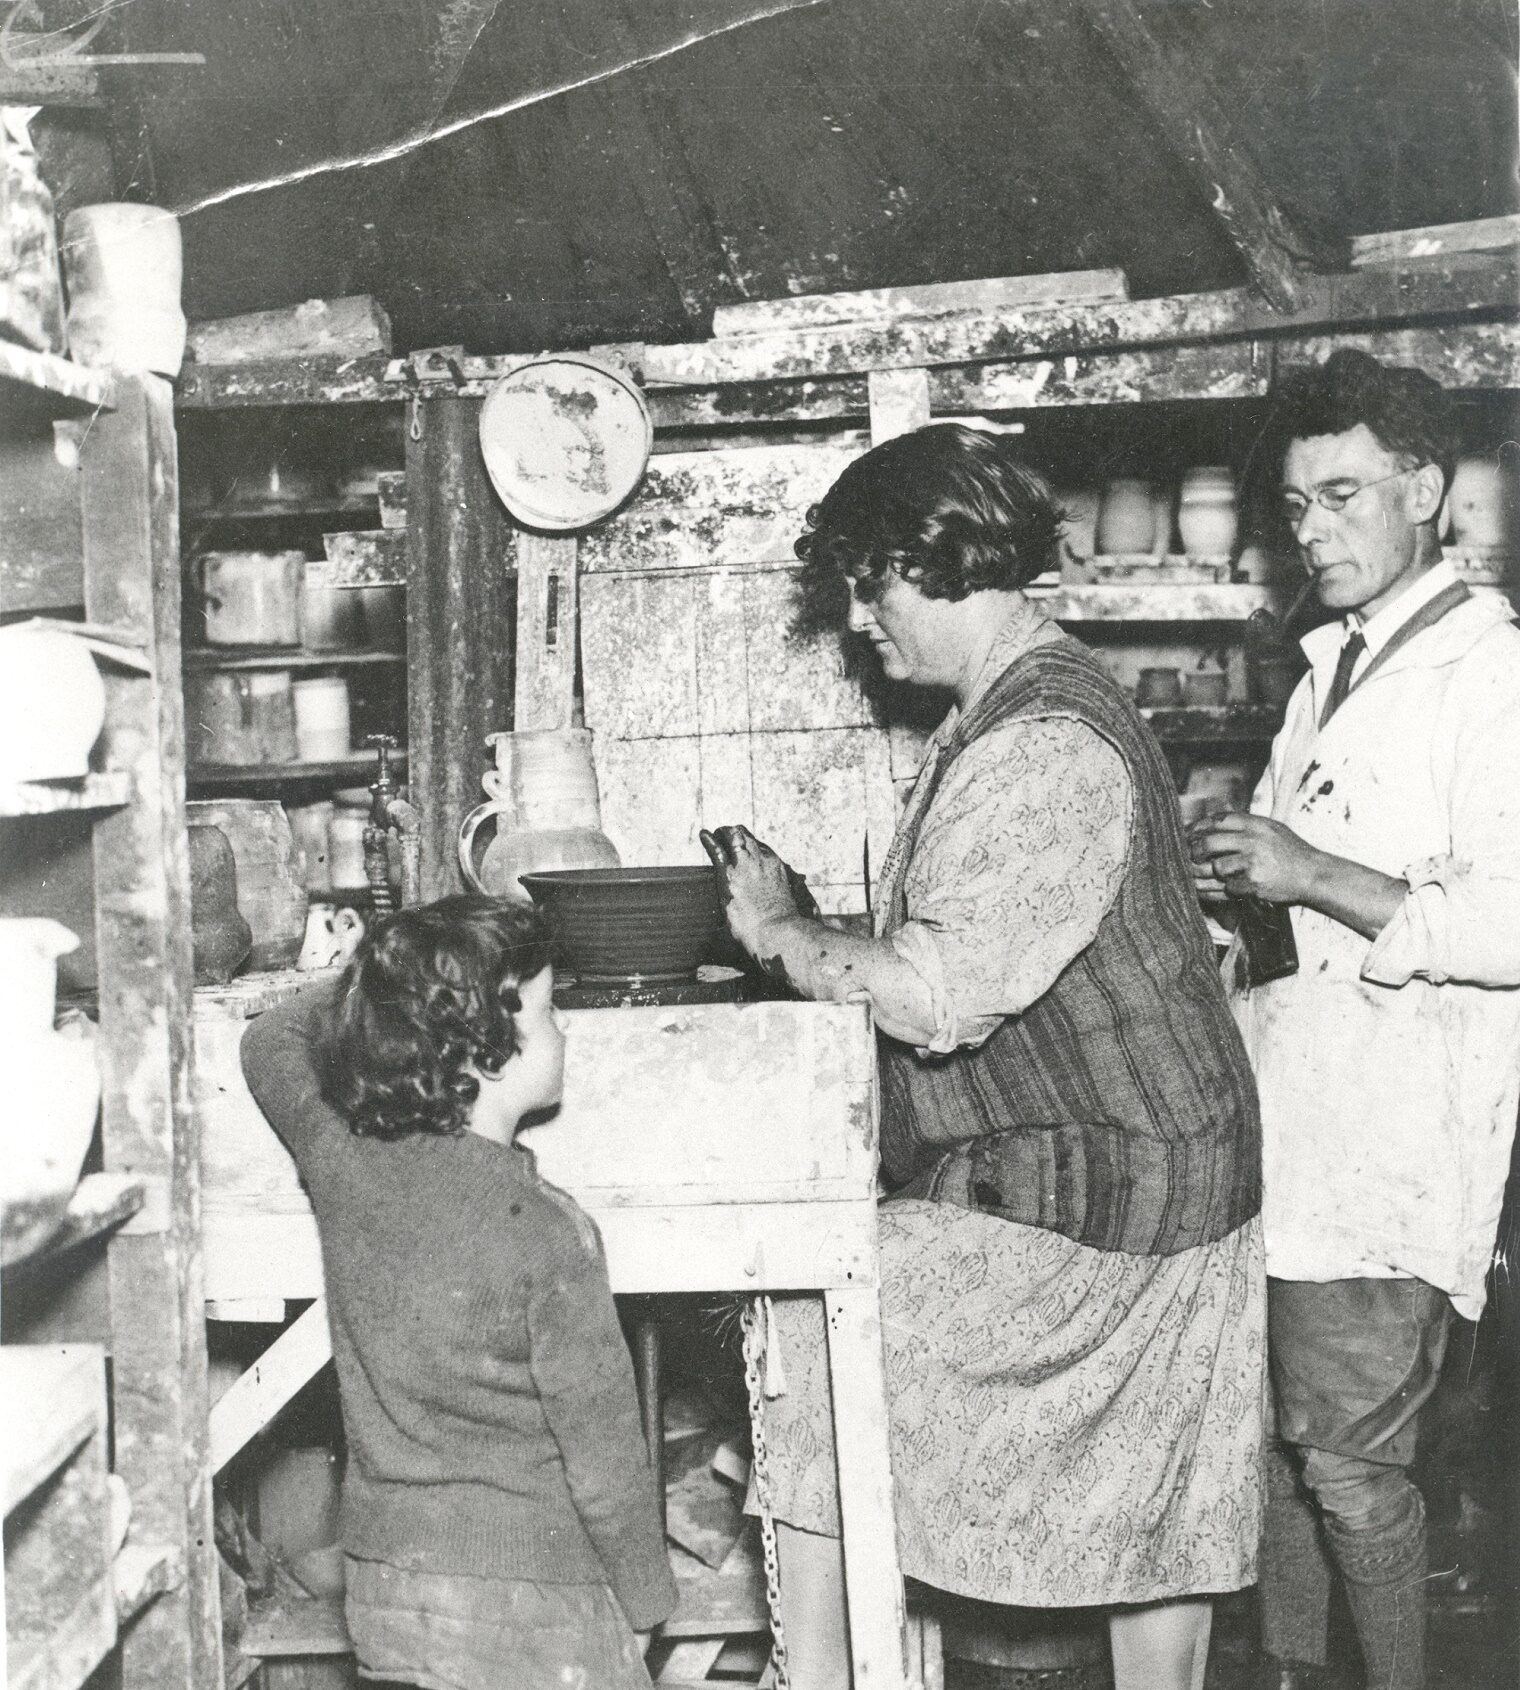 Rosemary Wren (aged 7), Denise and Henry Wren in the studio at ''Potters Croft''. Denise is working at a pot on the wheel, with Rosemary and Henry looking on.